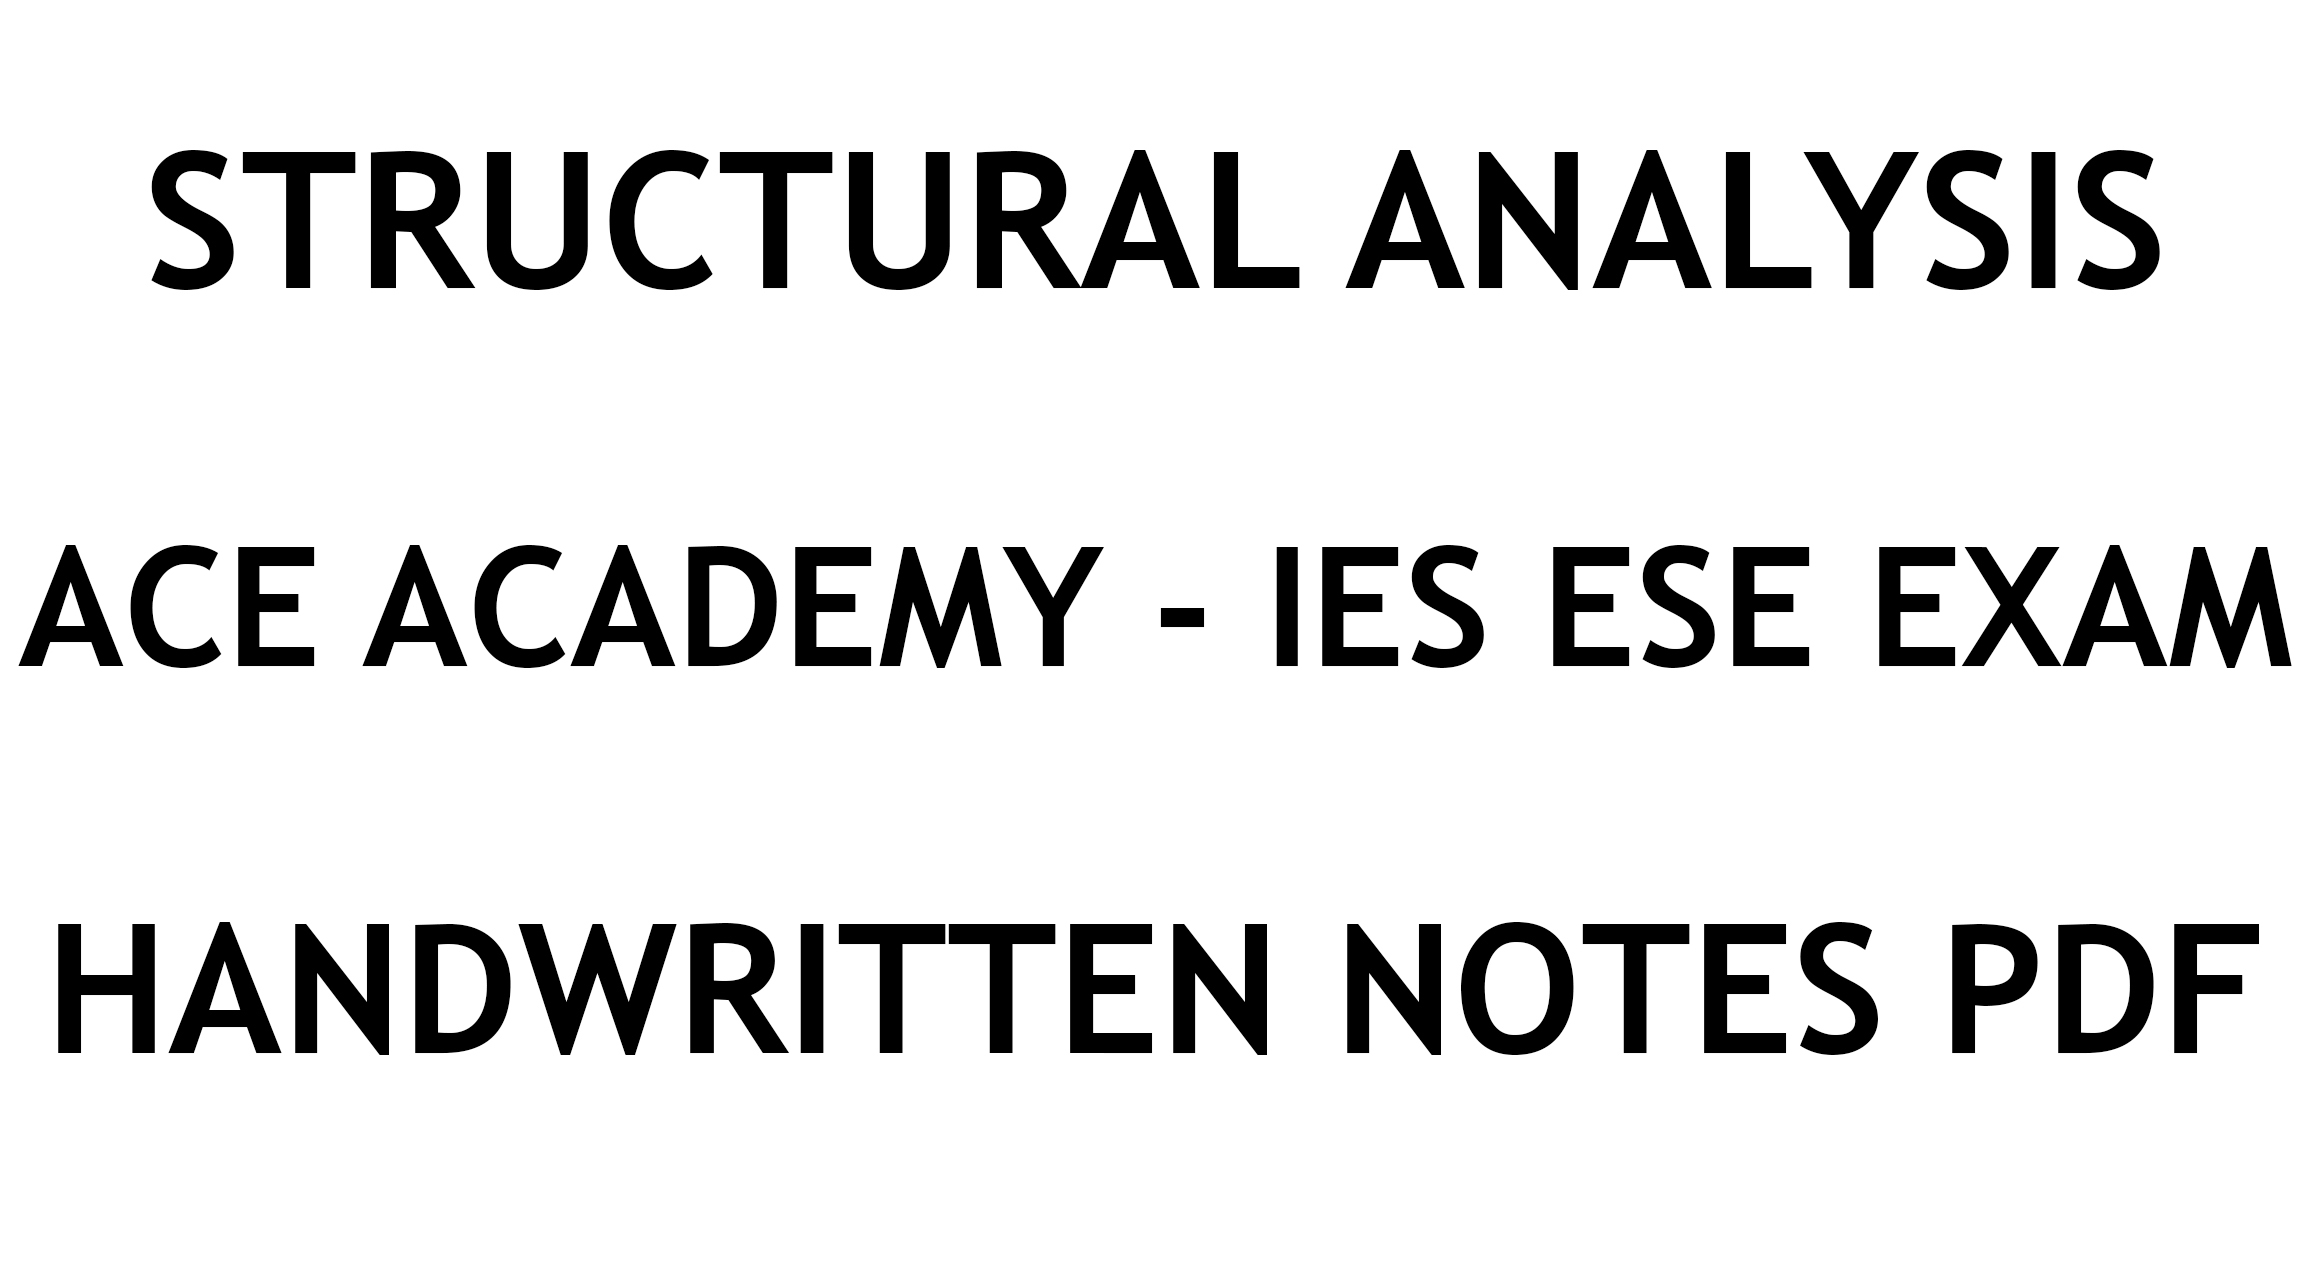 Structural Analysis IES ESE Ace Academy Handwritten Notes PDF